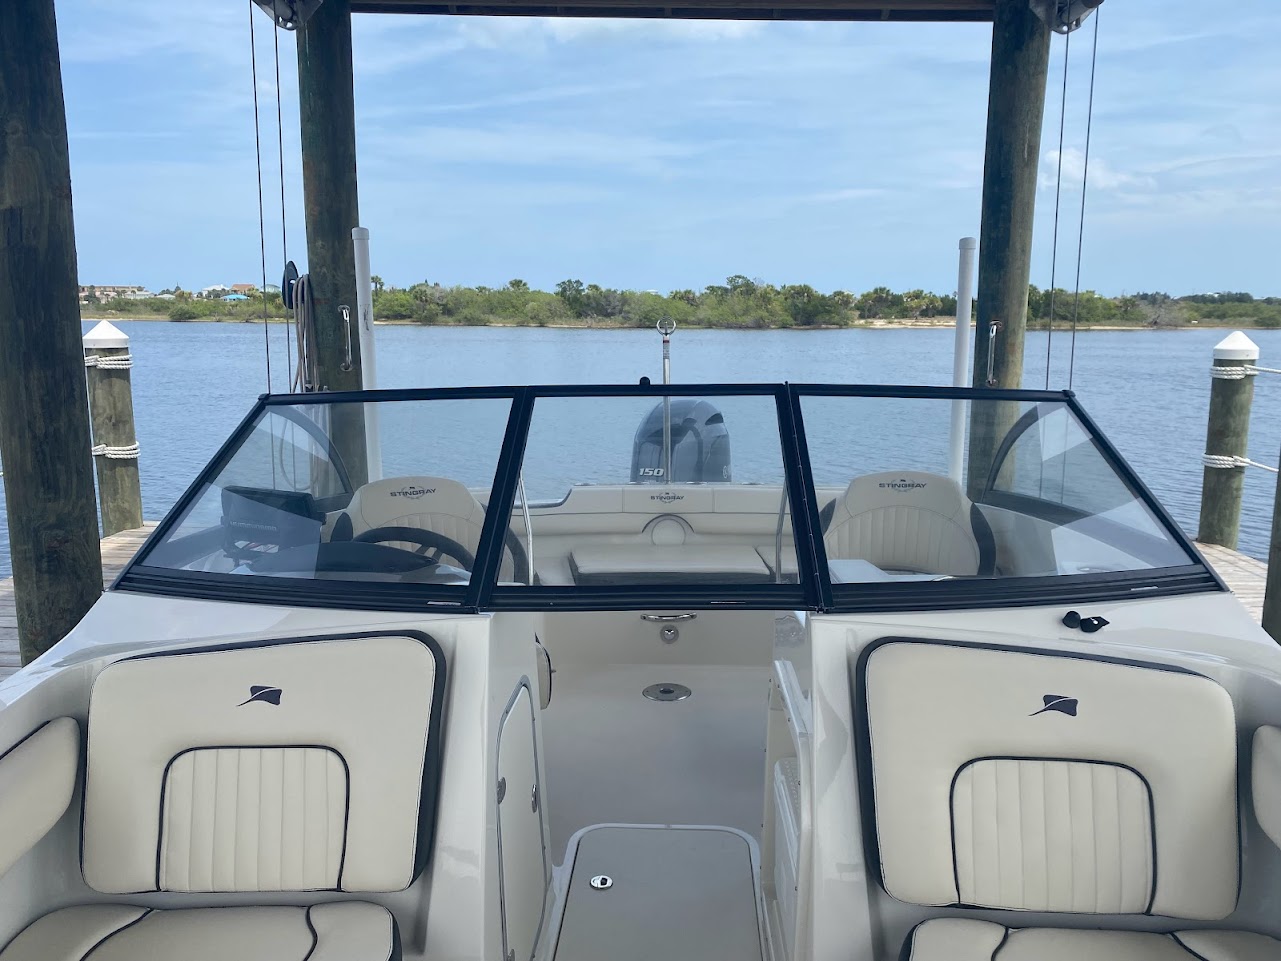 2022 Stingray 201DC Power boat for sale in Palm Coast, FL - image 18 